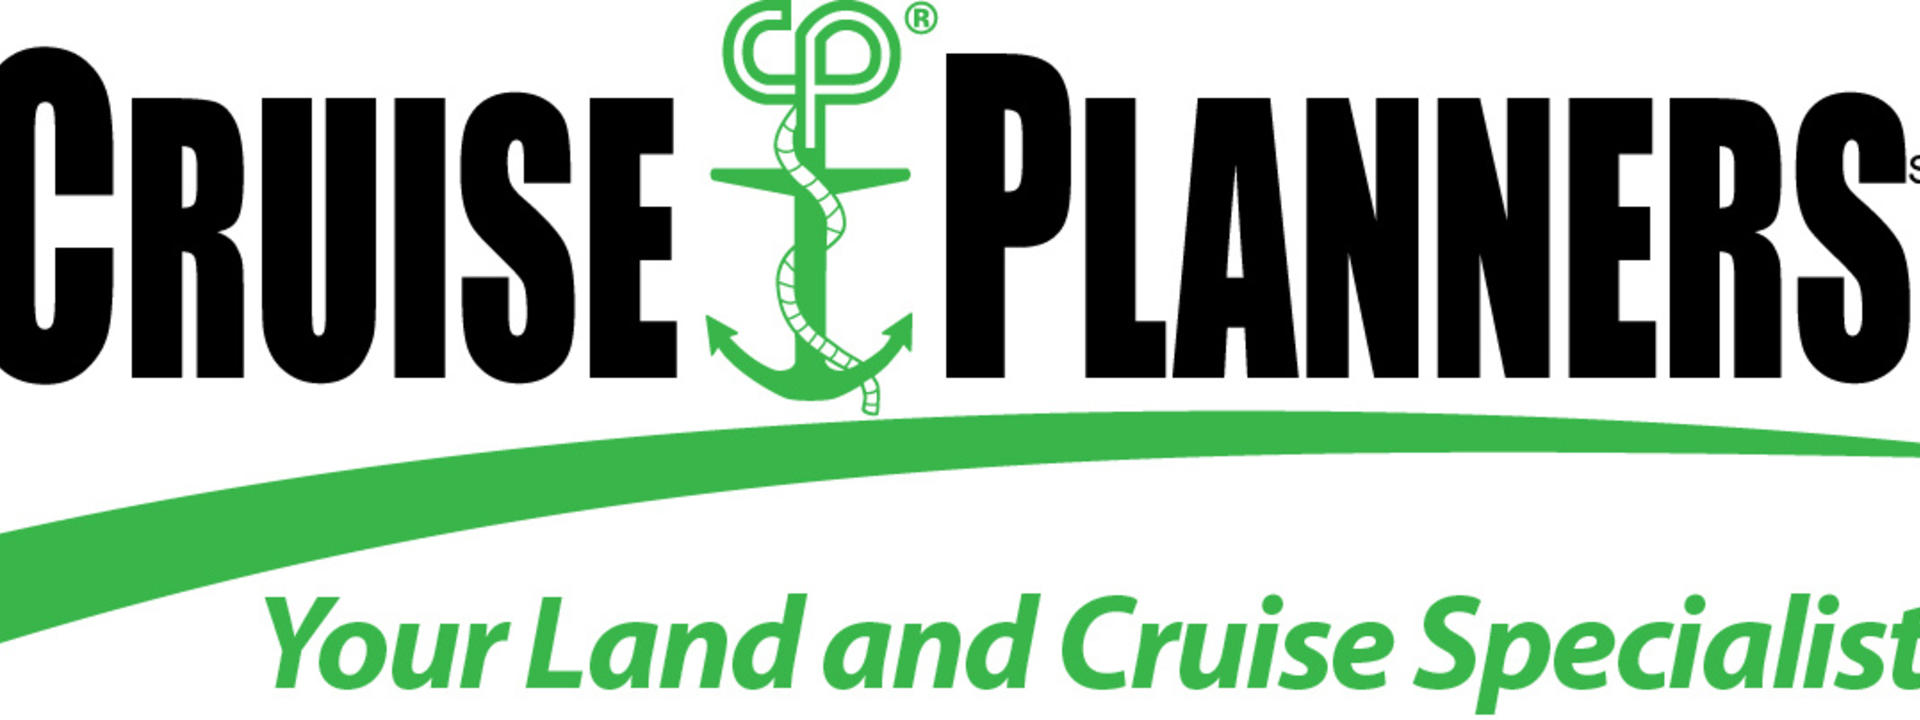 Logo: Cruise Planners